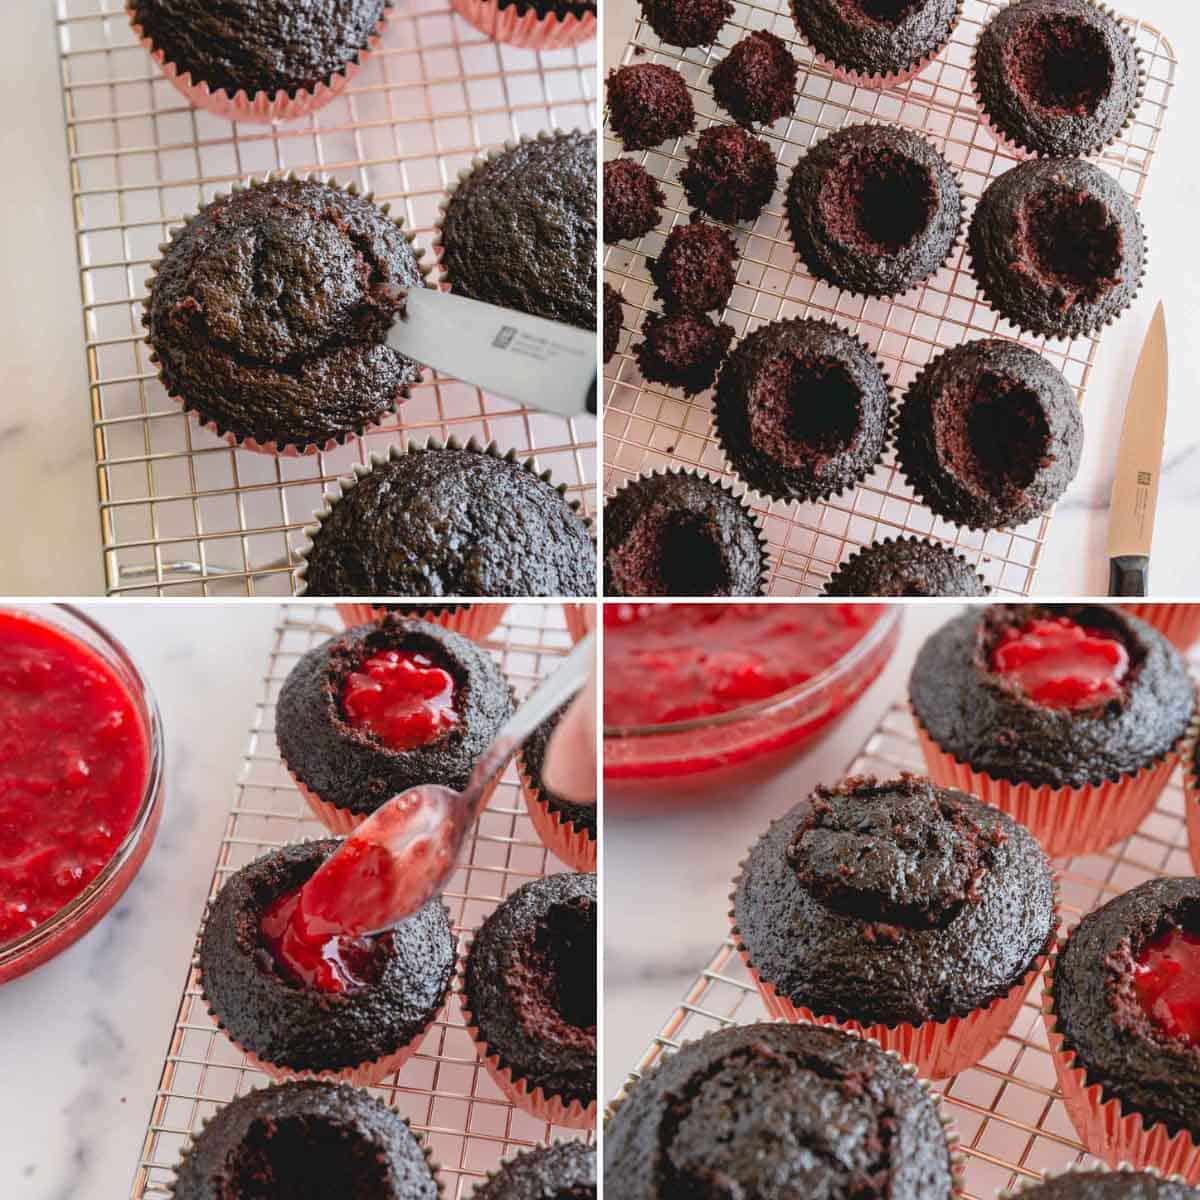 Four images showing chocolate cupcakes being filled with strawberry jam in the center.